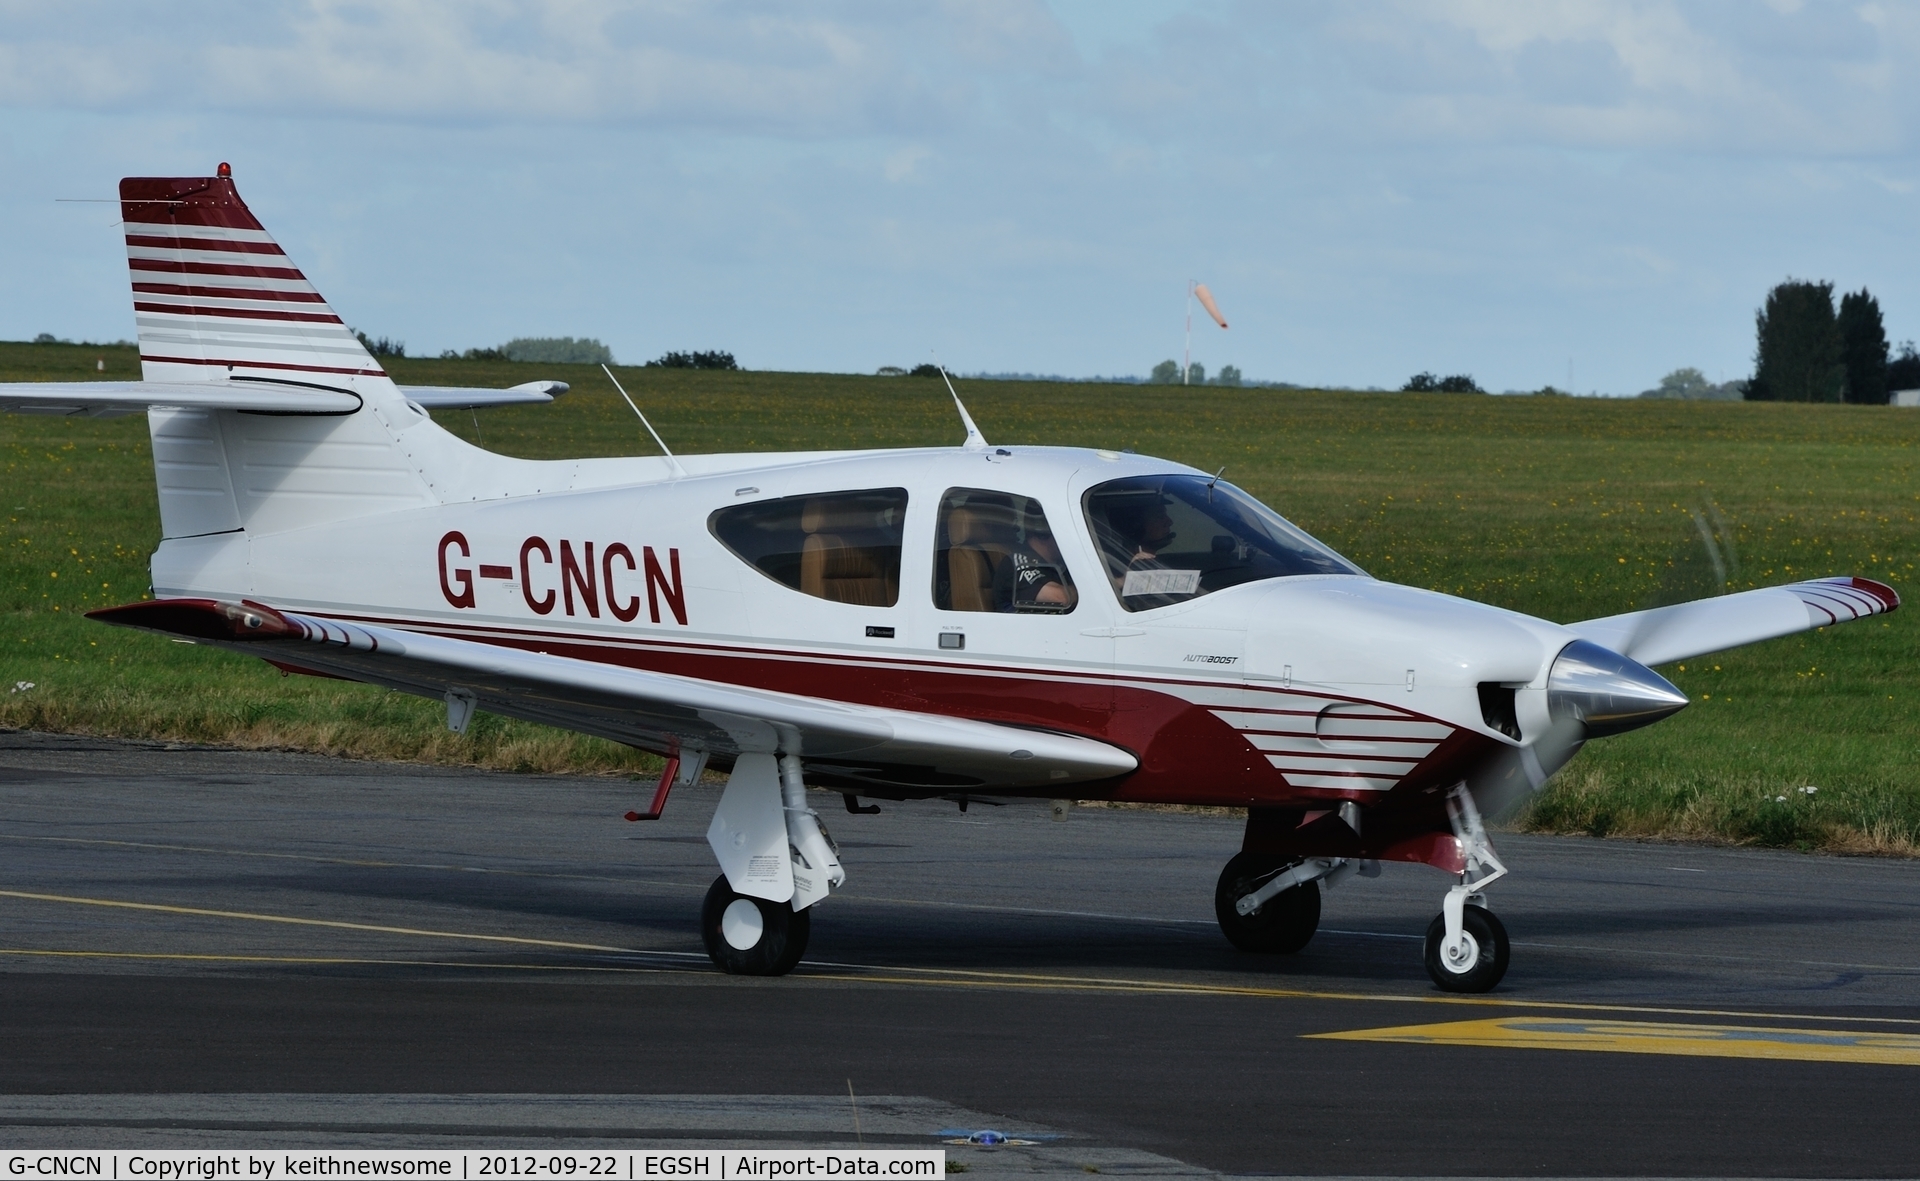 G-CNCN, 1977 Rockwell Commander 112TCA C/N 13151, A nice looking aircraft !